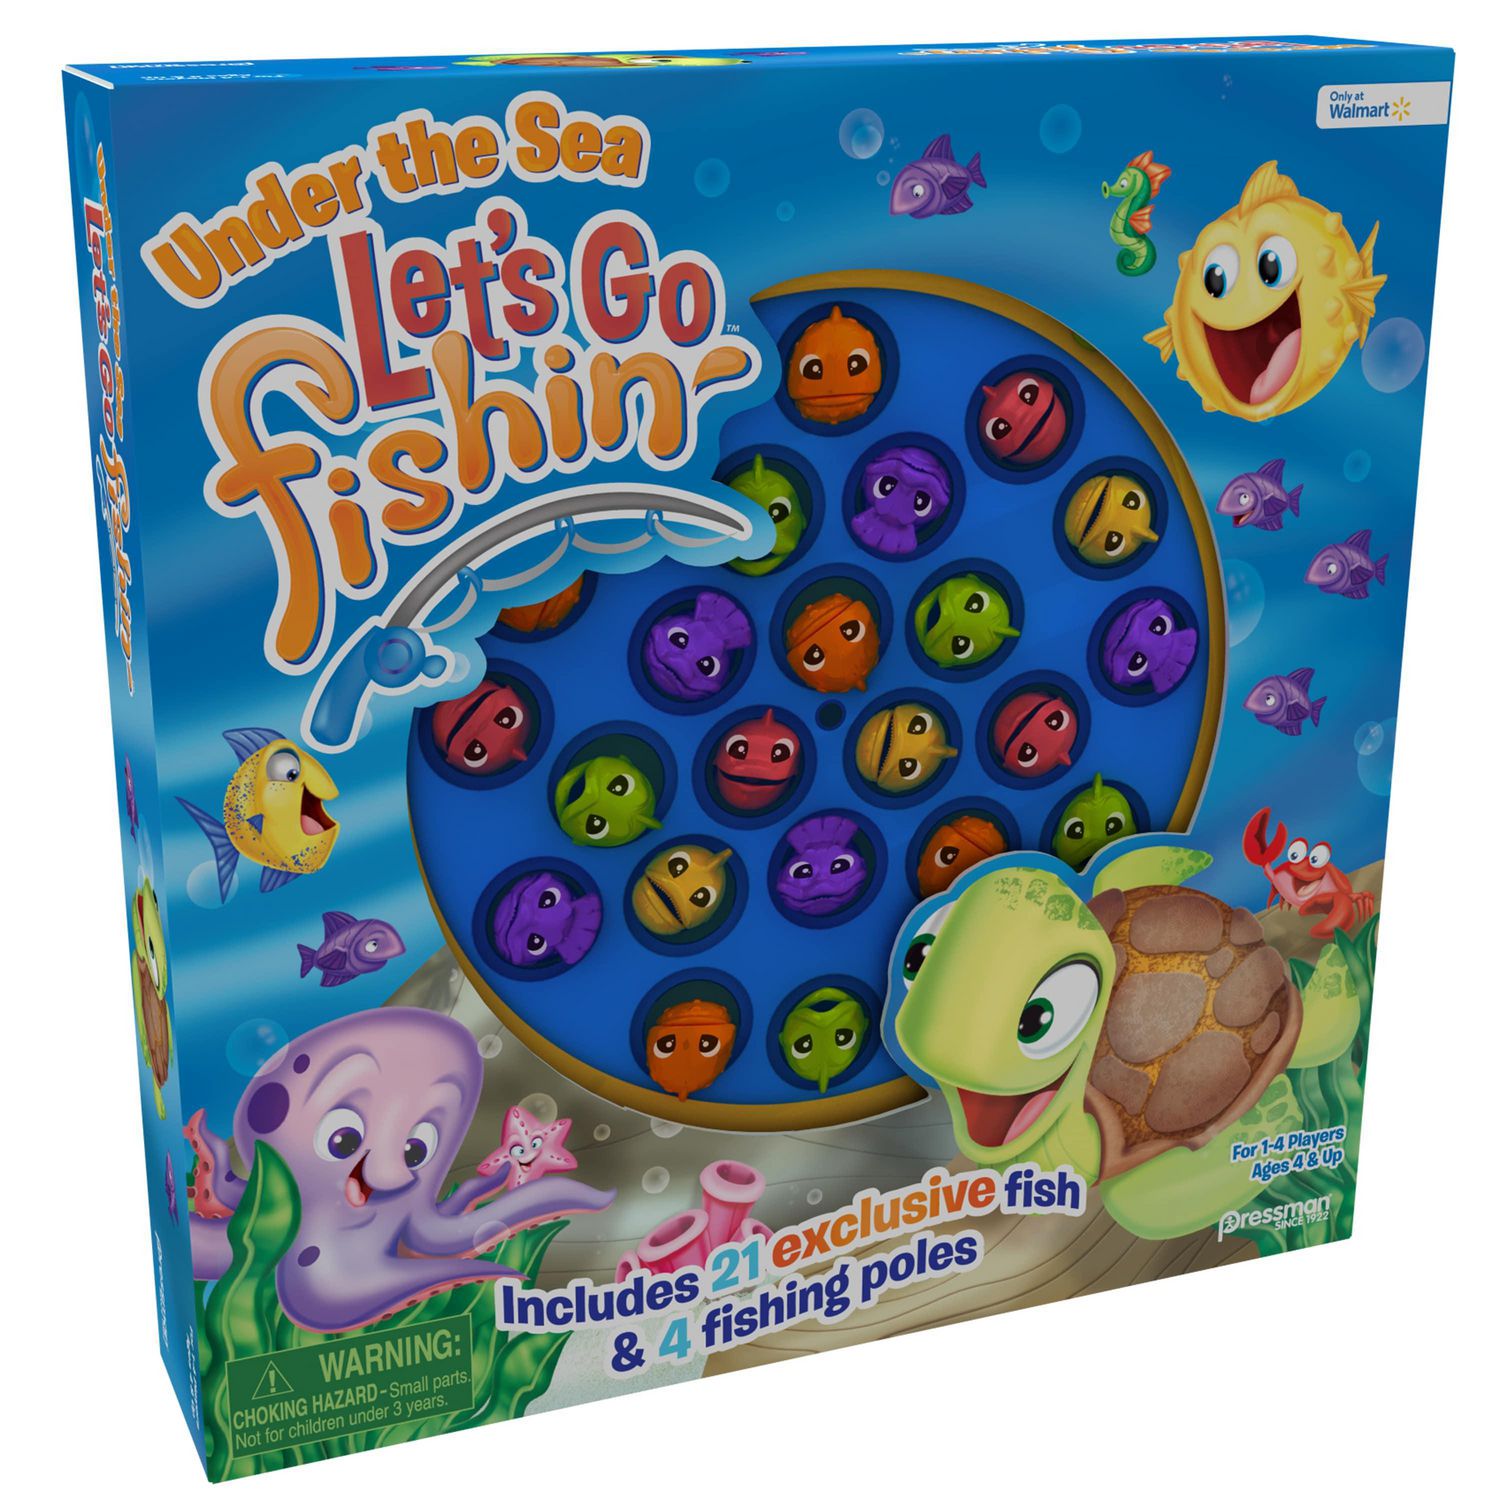 Let's Go Fishin' Game by Pressman - The Original Fast-Action